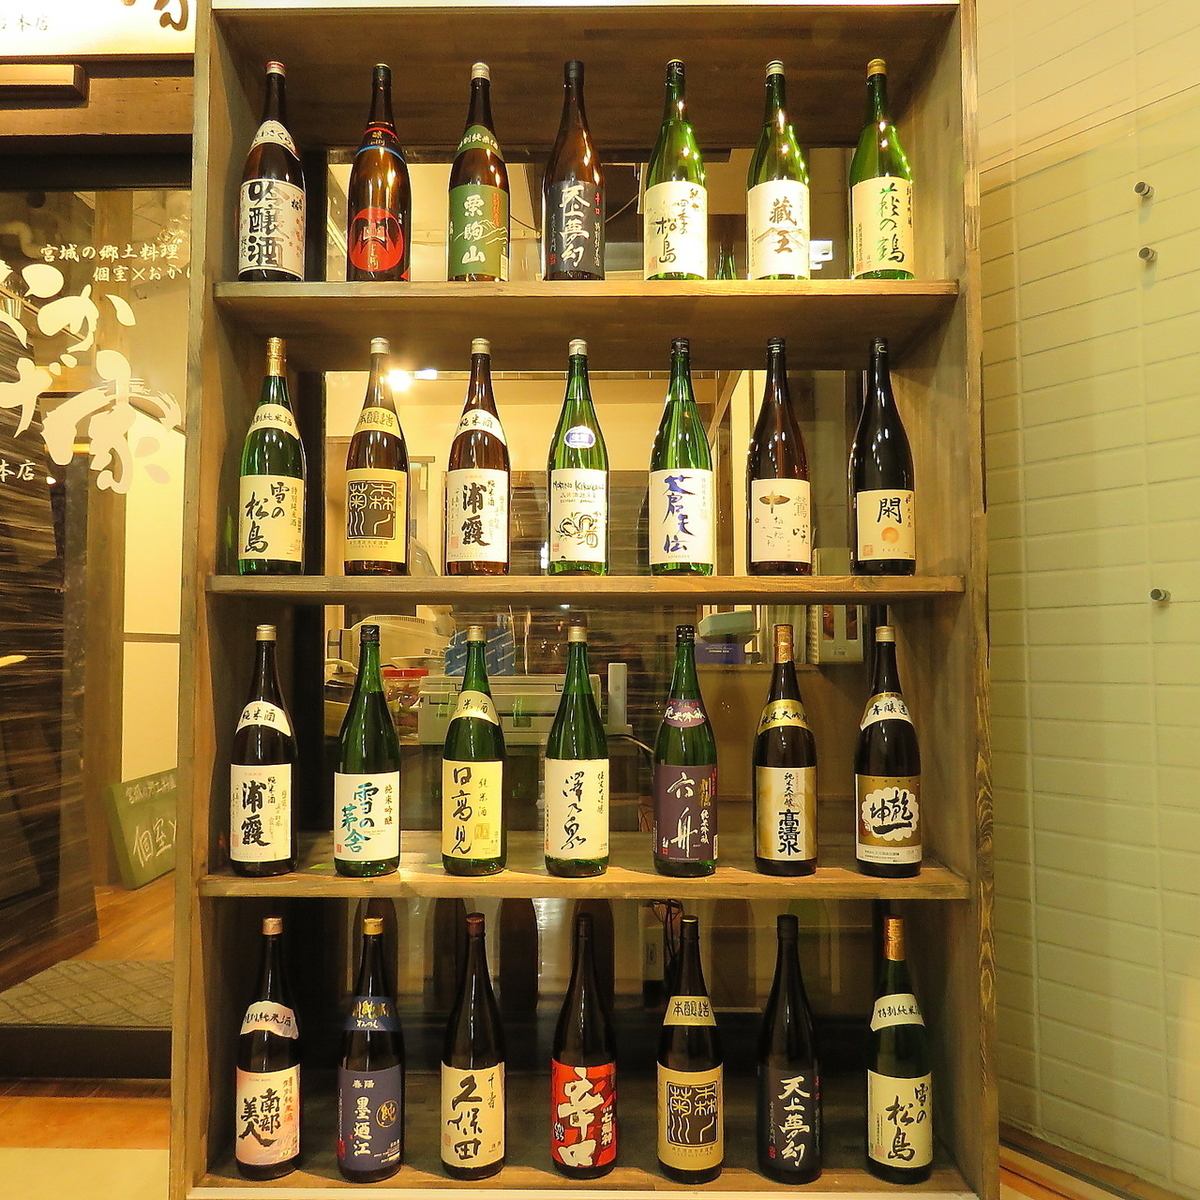 We have over 30 types of sake from Tohoku♪